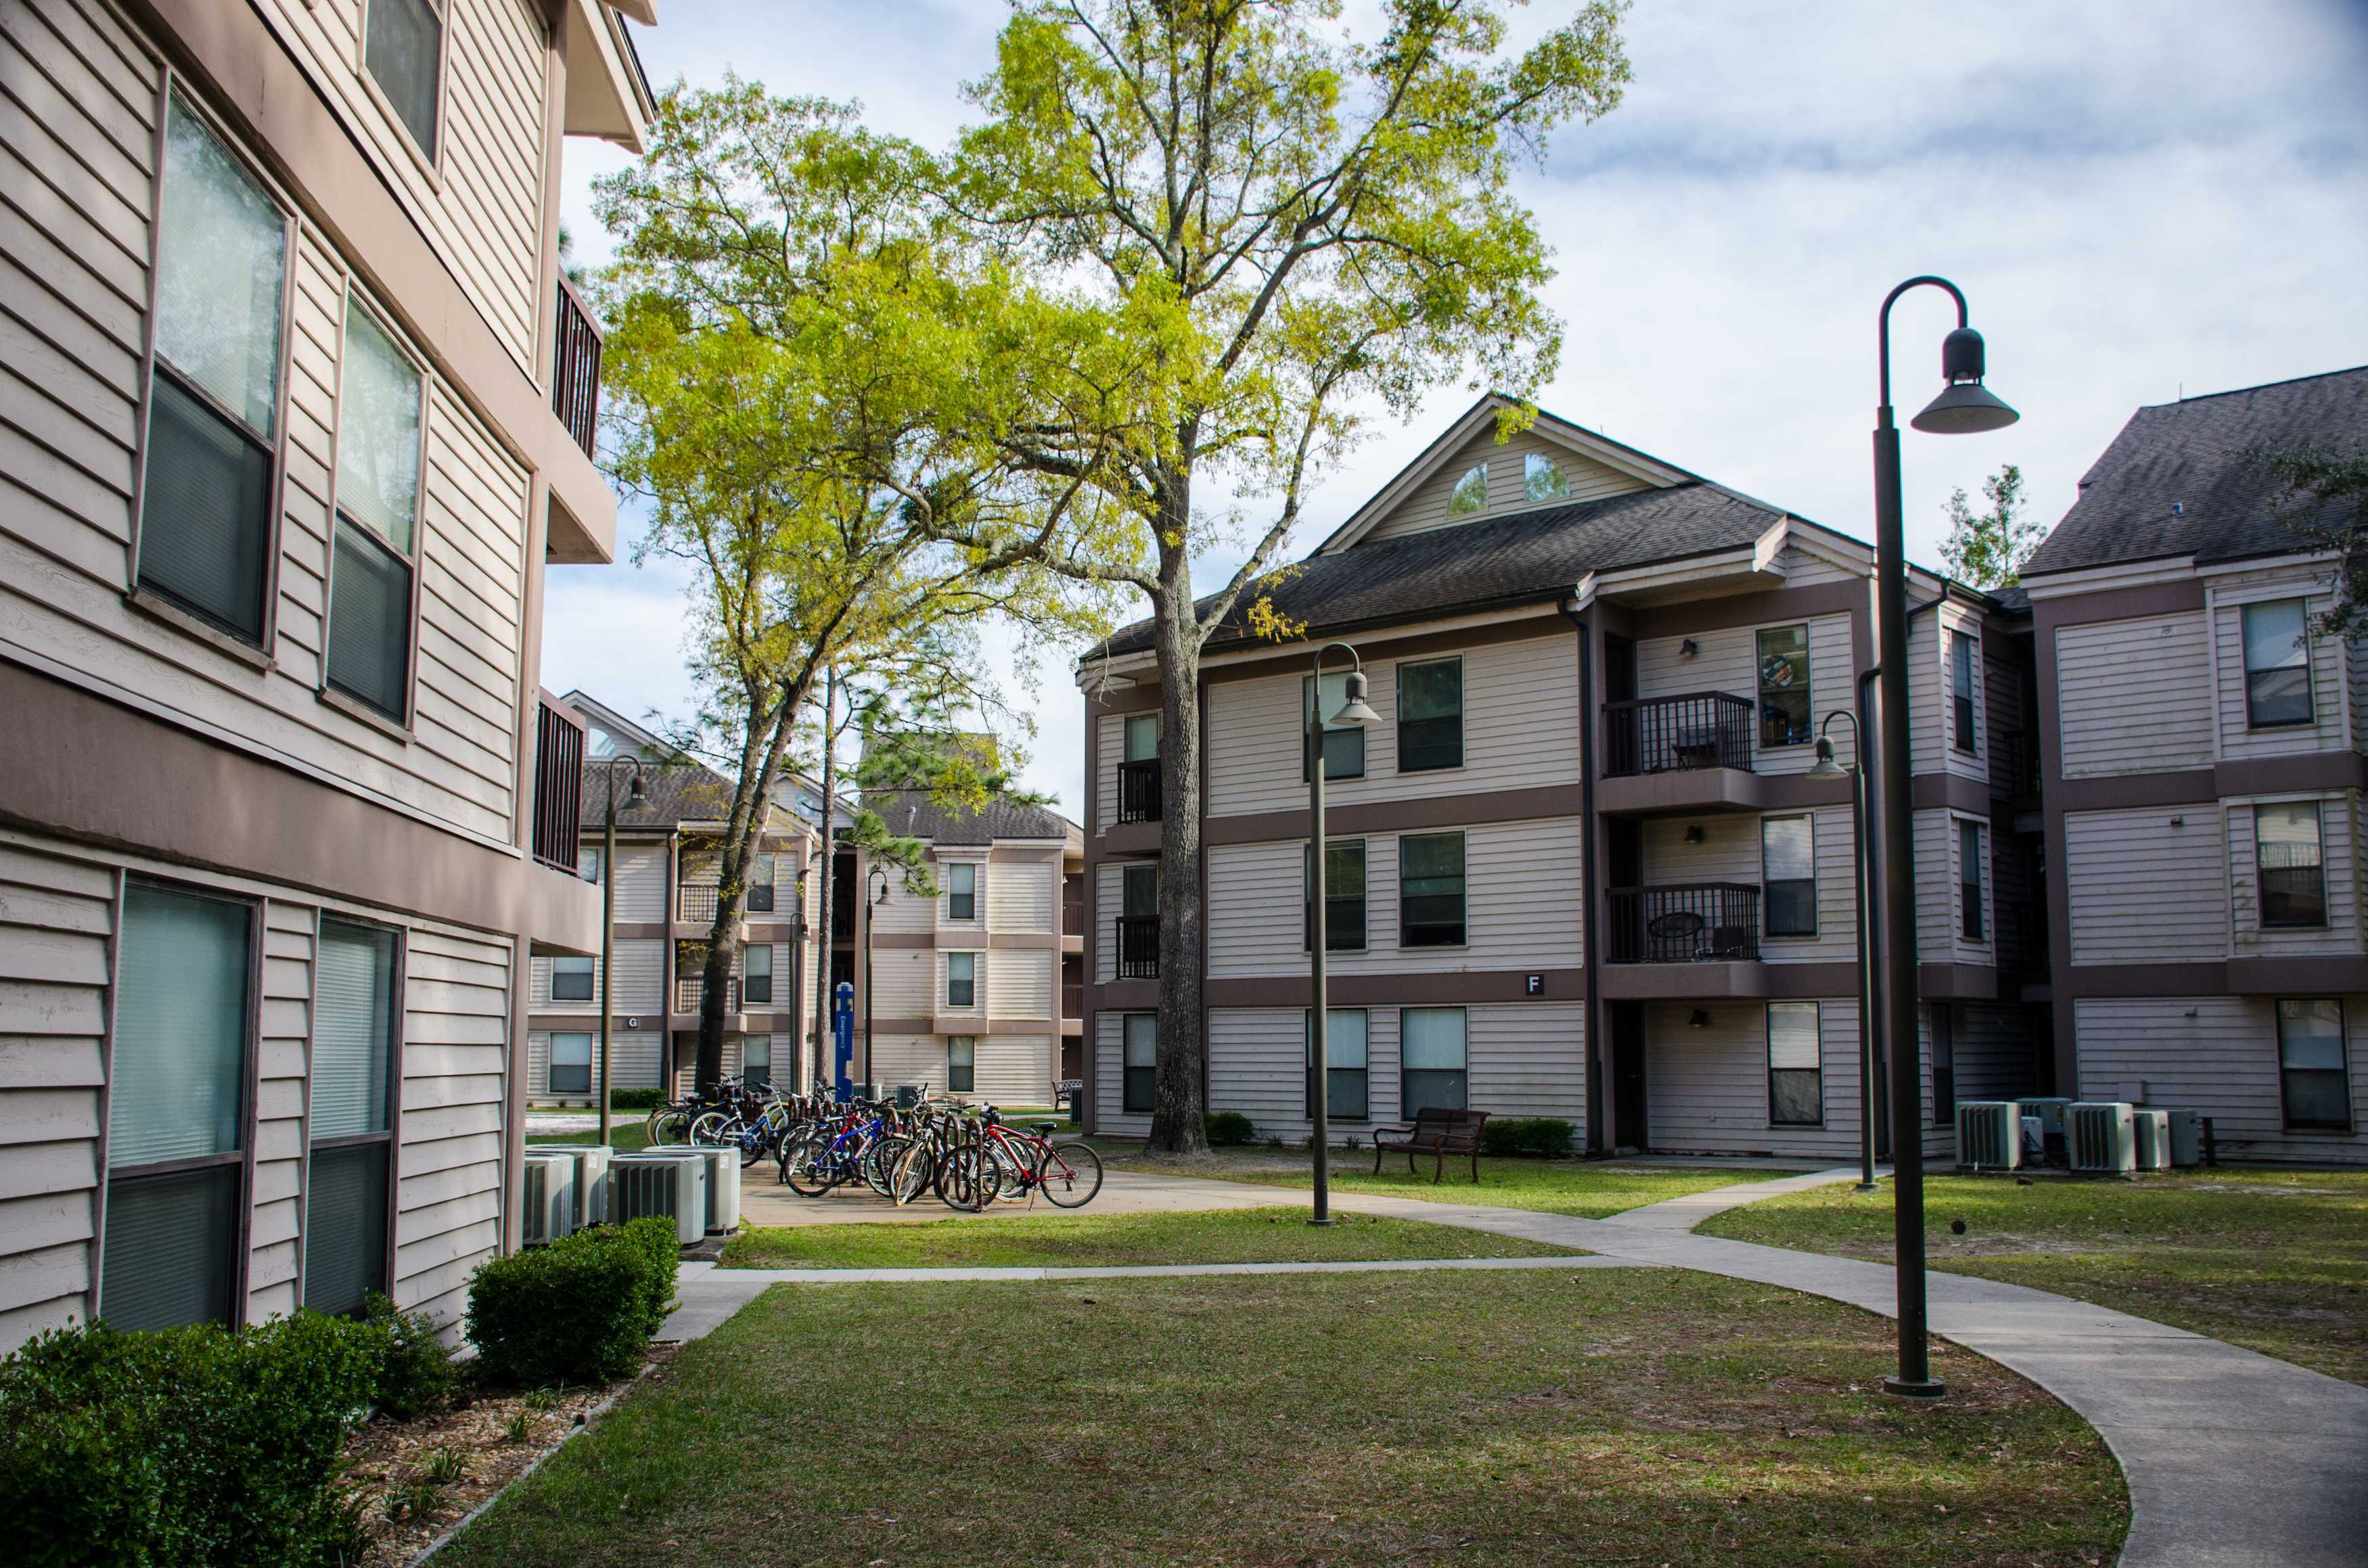 The Osprey Village, for upperclassmen, is a wet dorm. Only students over 21 may keep alcohol in their dorm. Photo by Robert Curtis